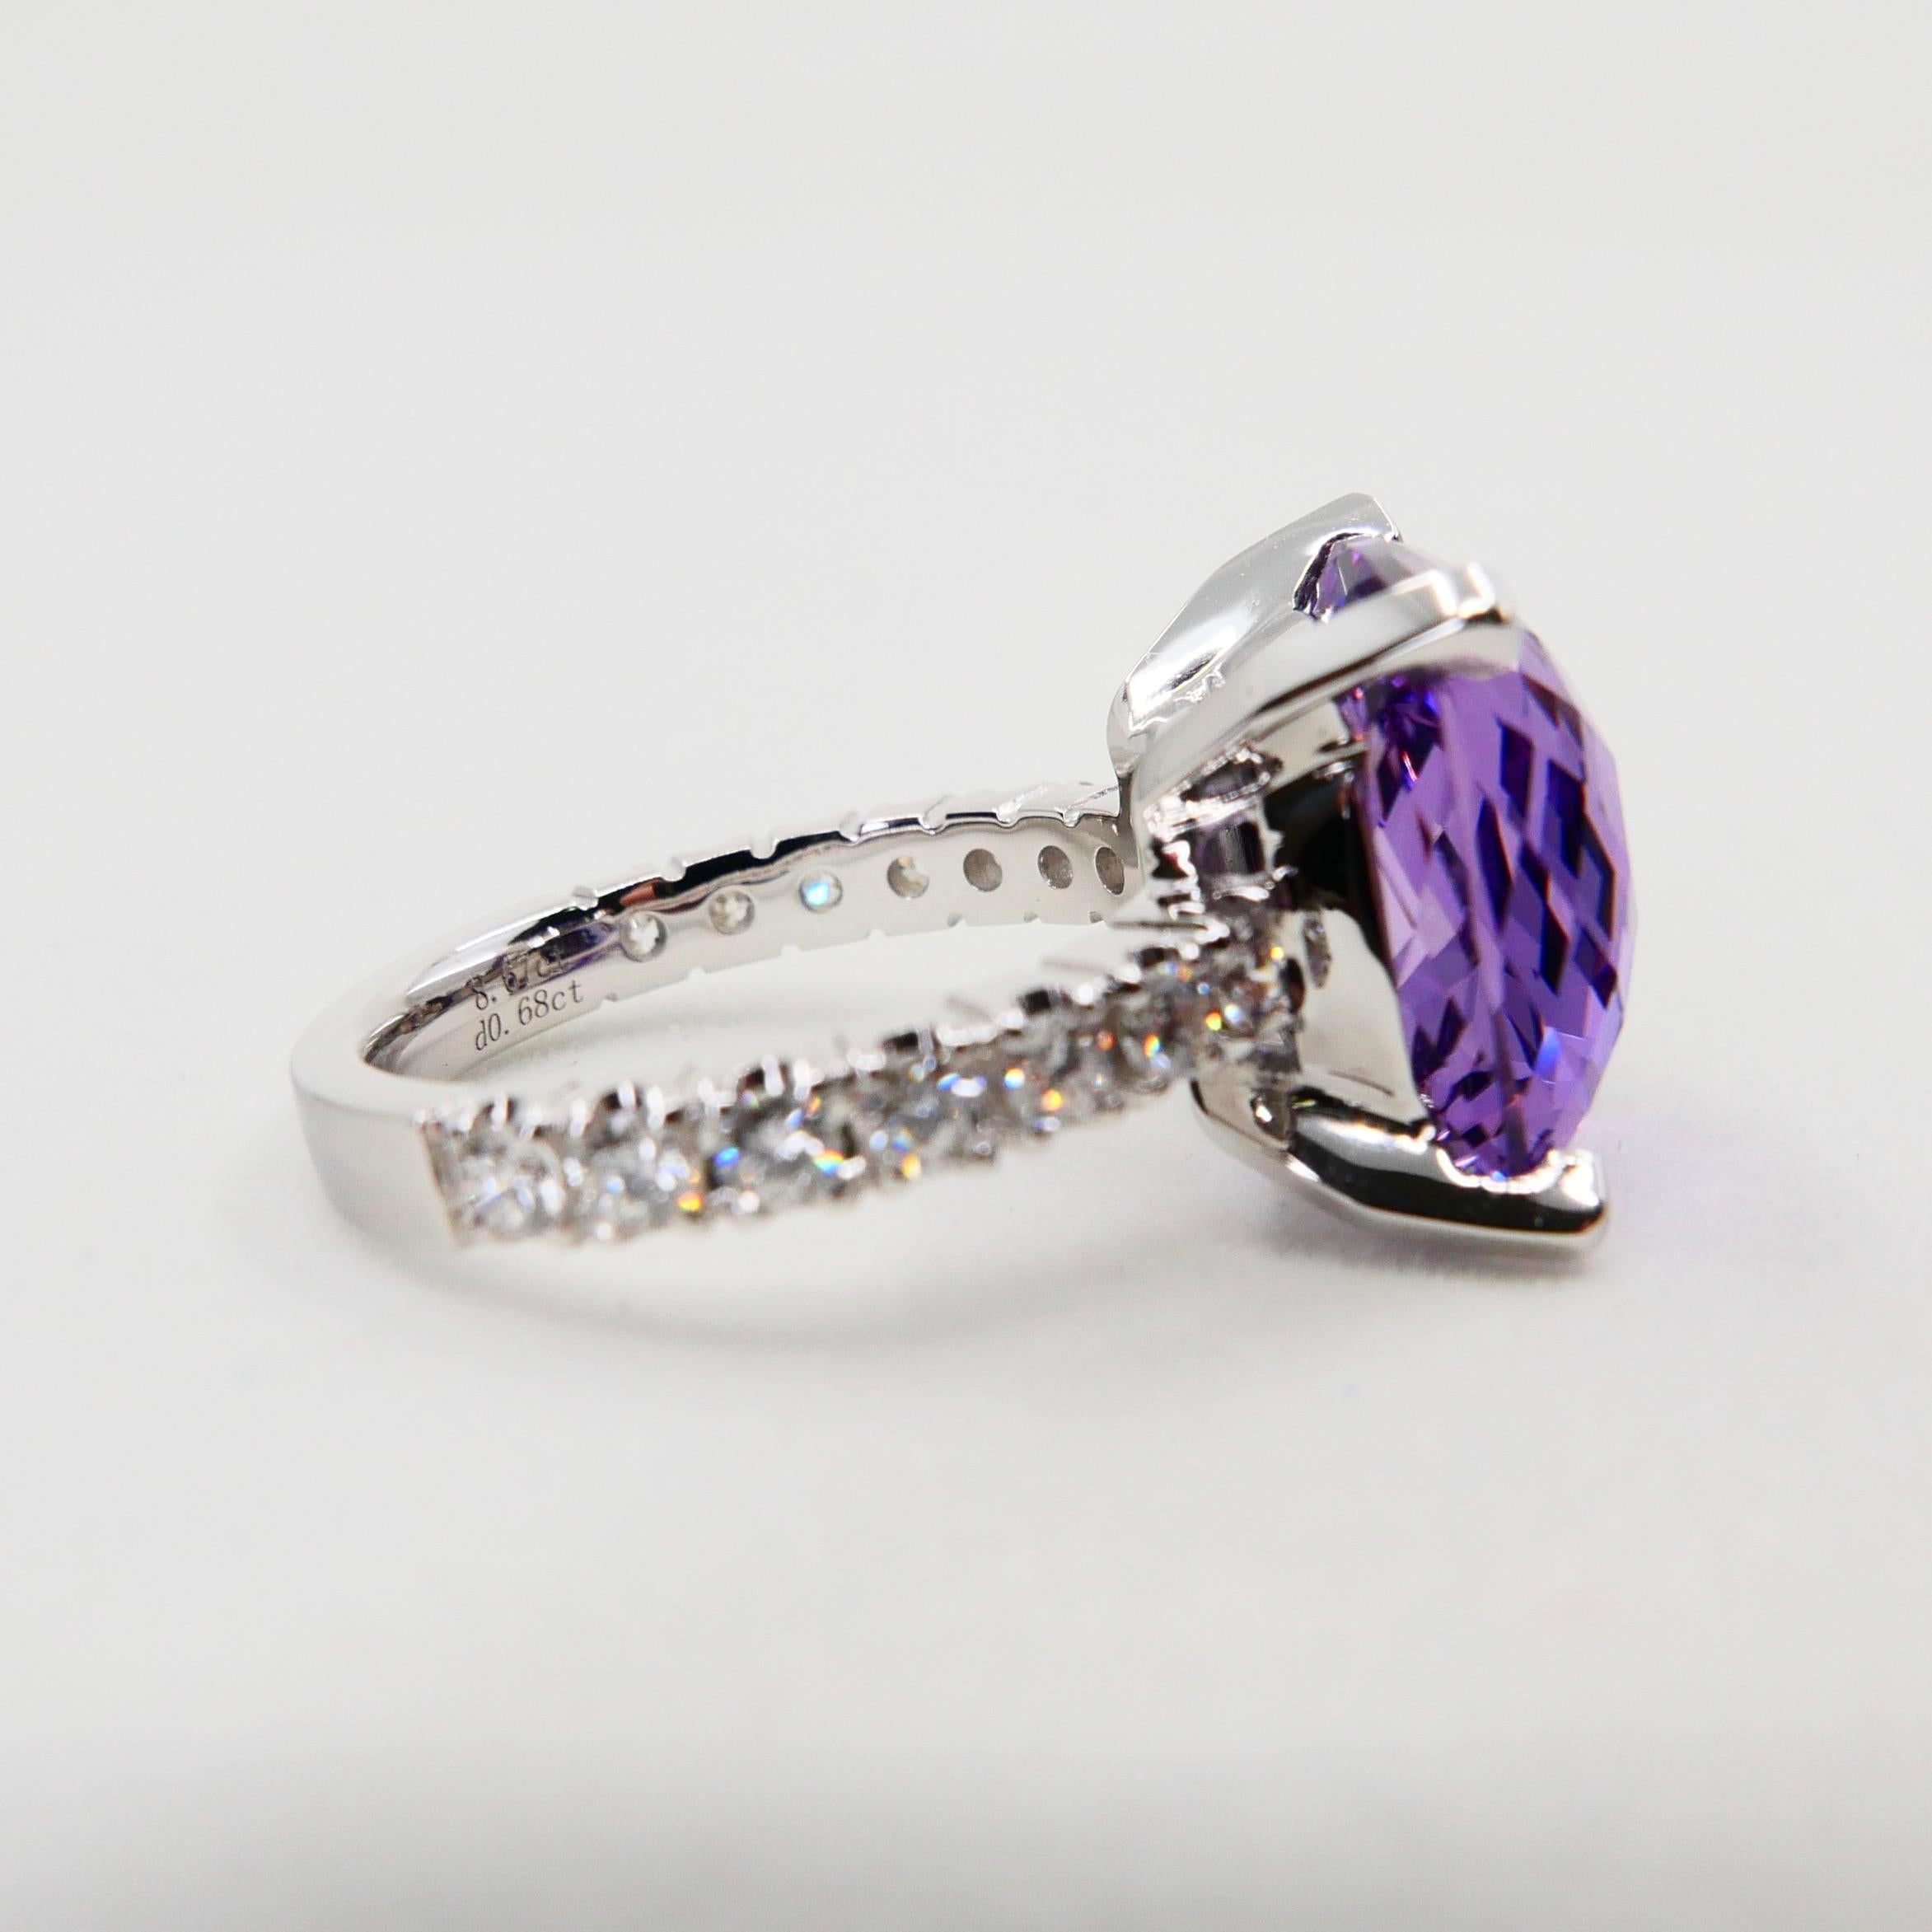 8.67 Carat Faceted Amethyst and Diamond Cocktail Ring, 18 Karat White Gold For Sale 1